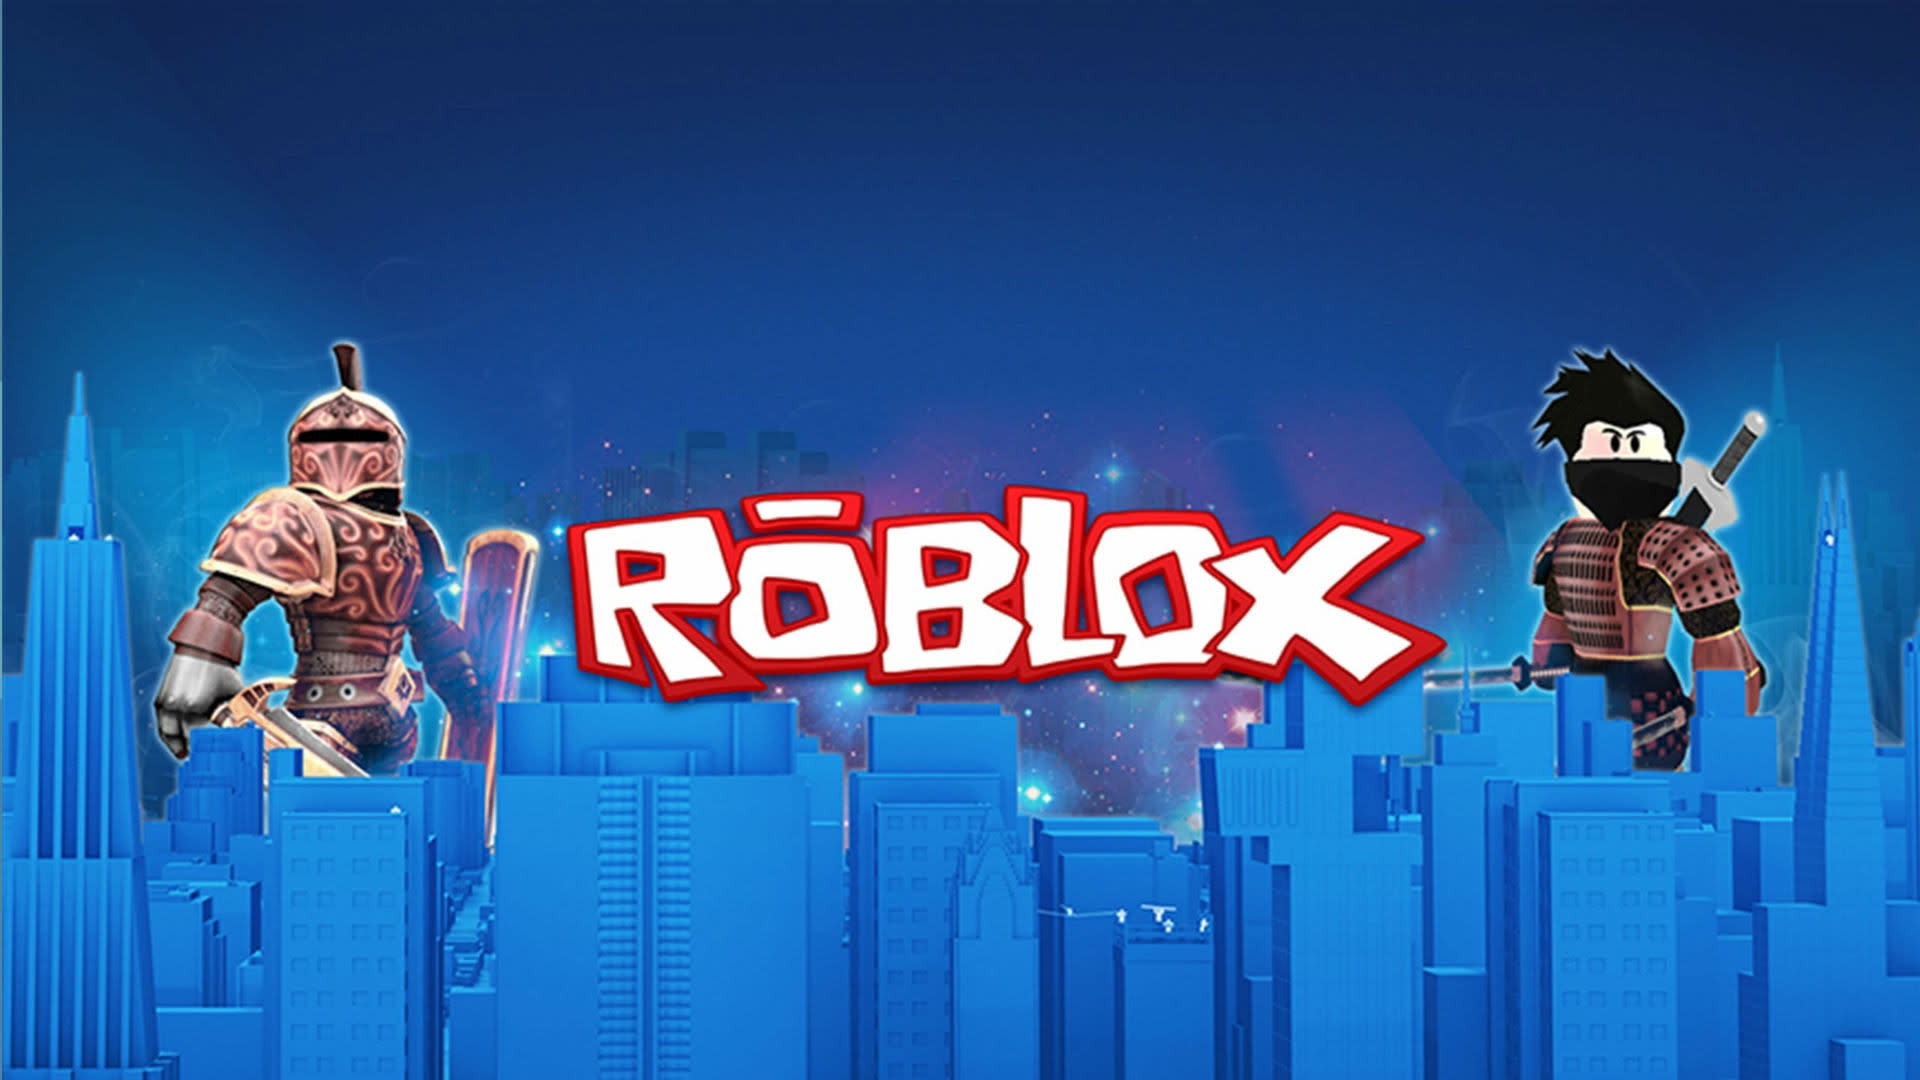 Roblox Enters Vr Space With Cross Platform Support - isolation roblox gameplay